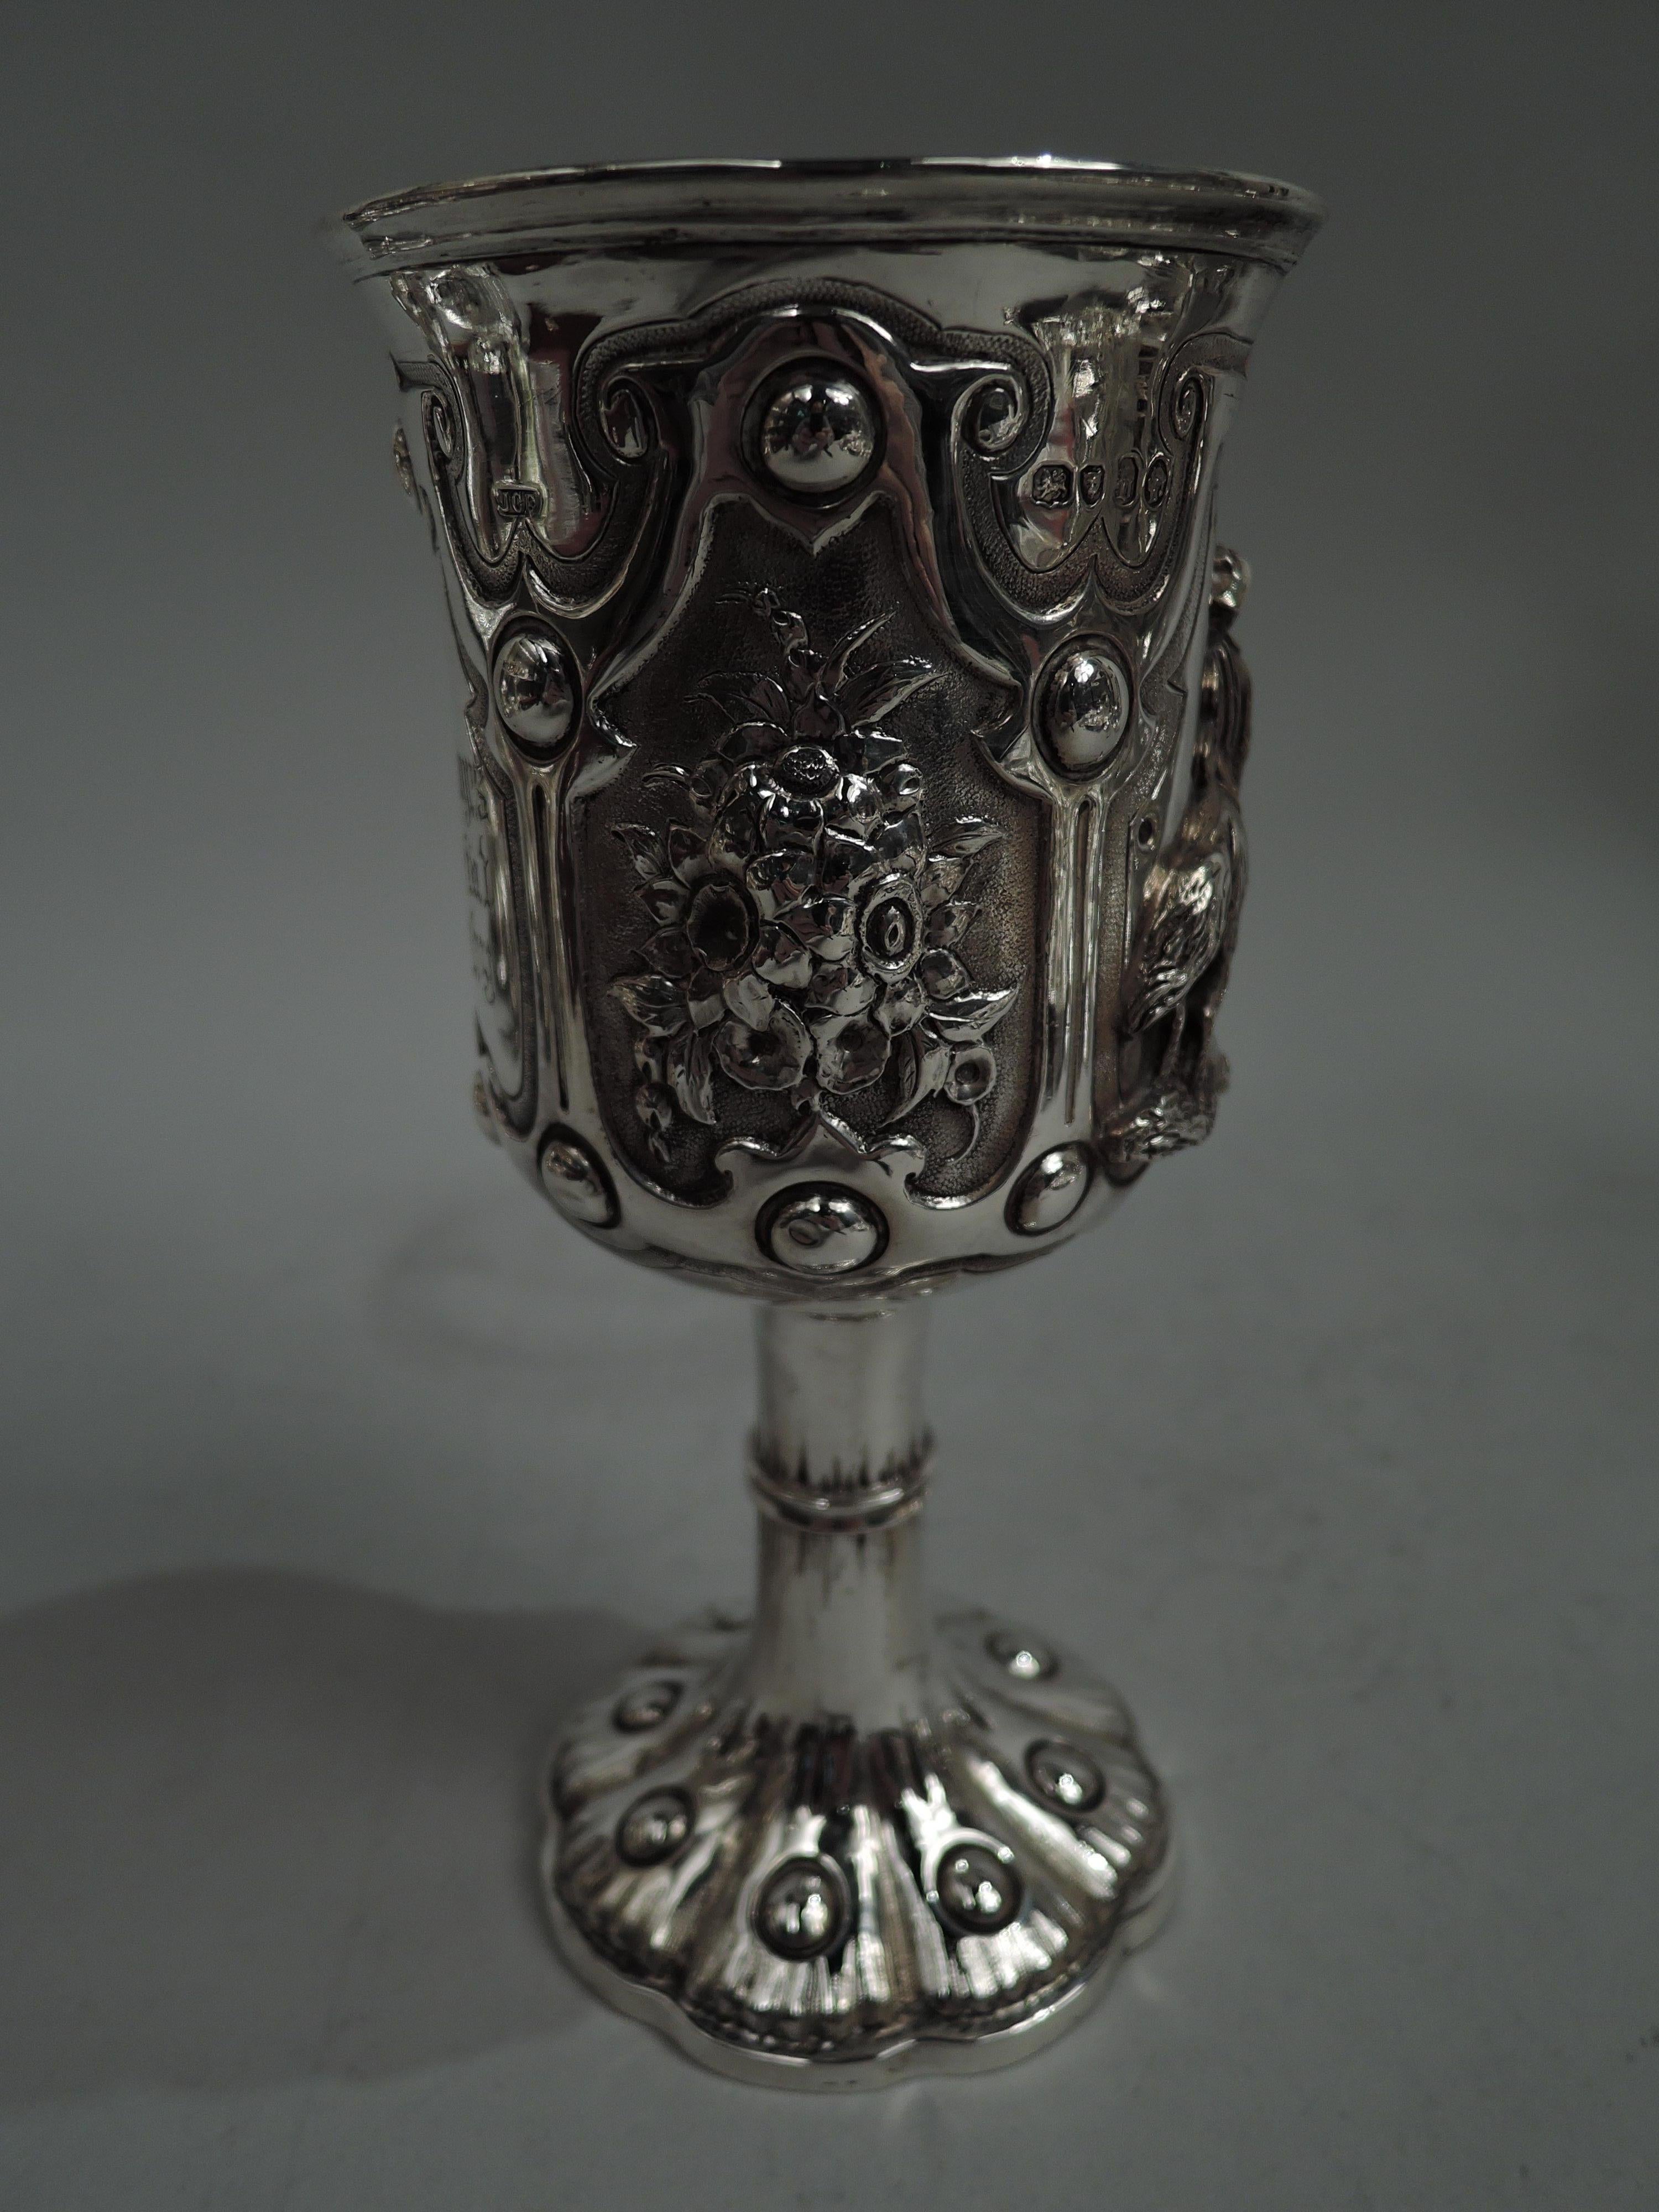 Victorian Gothic sterling silver goblet. Made by James Charles Edington in London in 1857. Tall and flared bowl with gilt interior; girdled cylindrical stem on raised foot with studded lobes and scalloped rim. Bowl has four studded and stippled